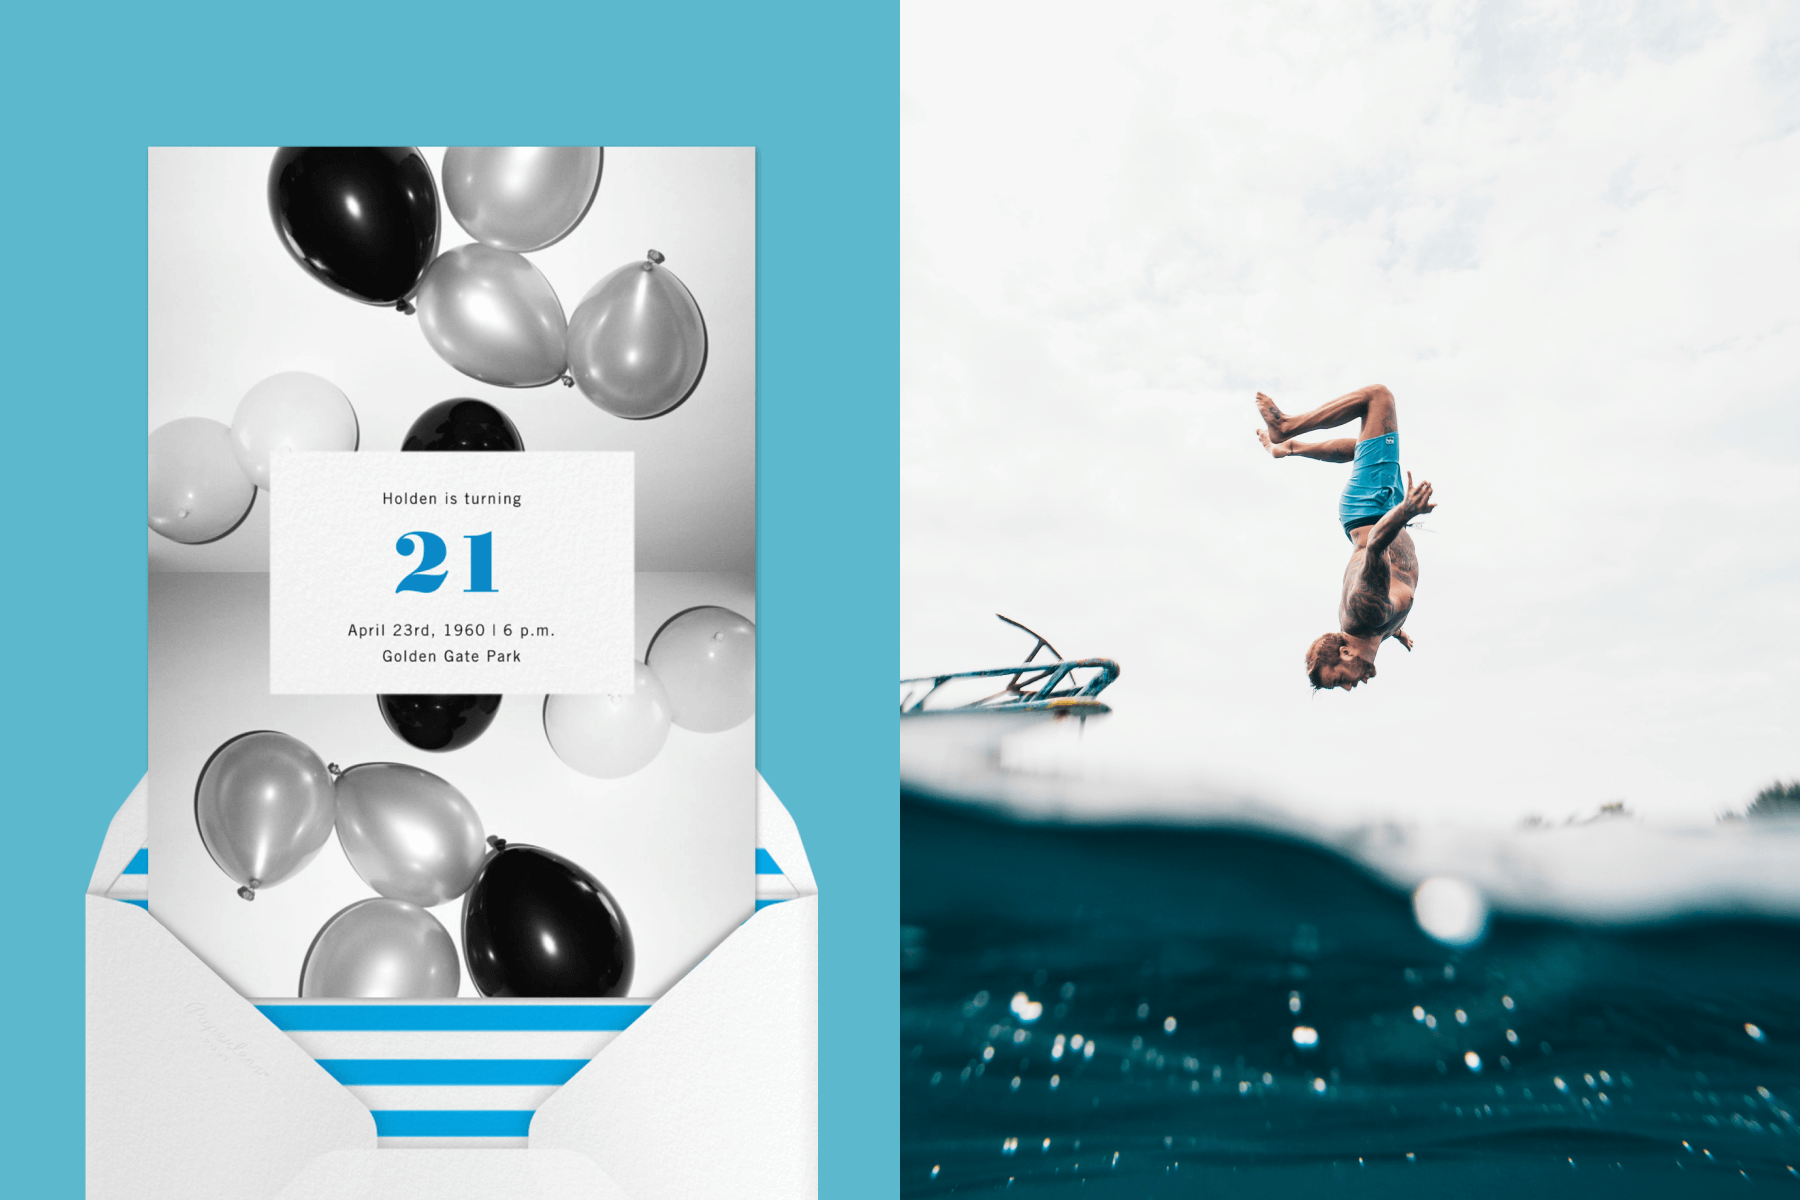 Left: A 21st birthday celebration featuring a small, centered text box and a large photo border featuring black and white balloons; Right: A young man doing a flip into water.